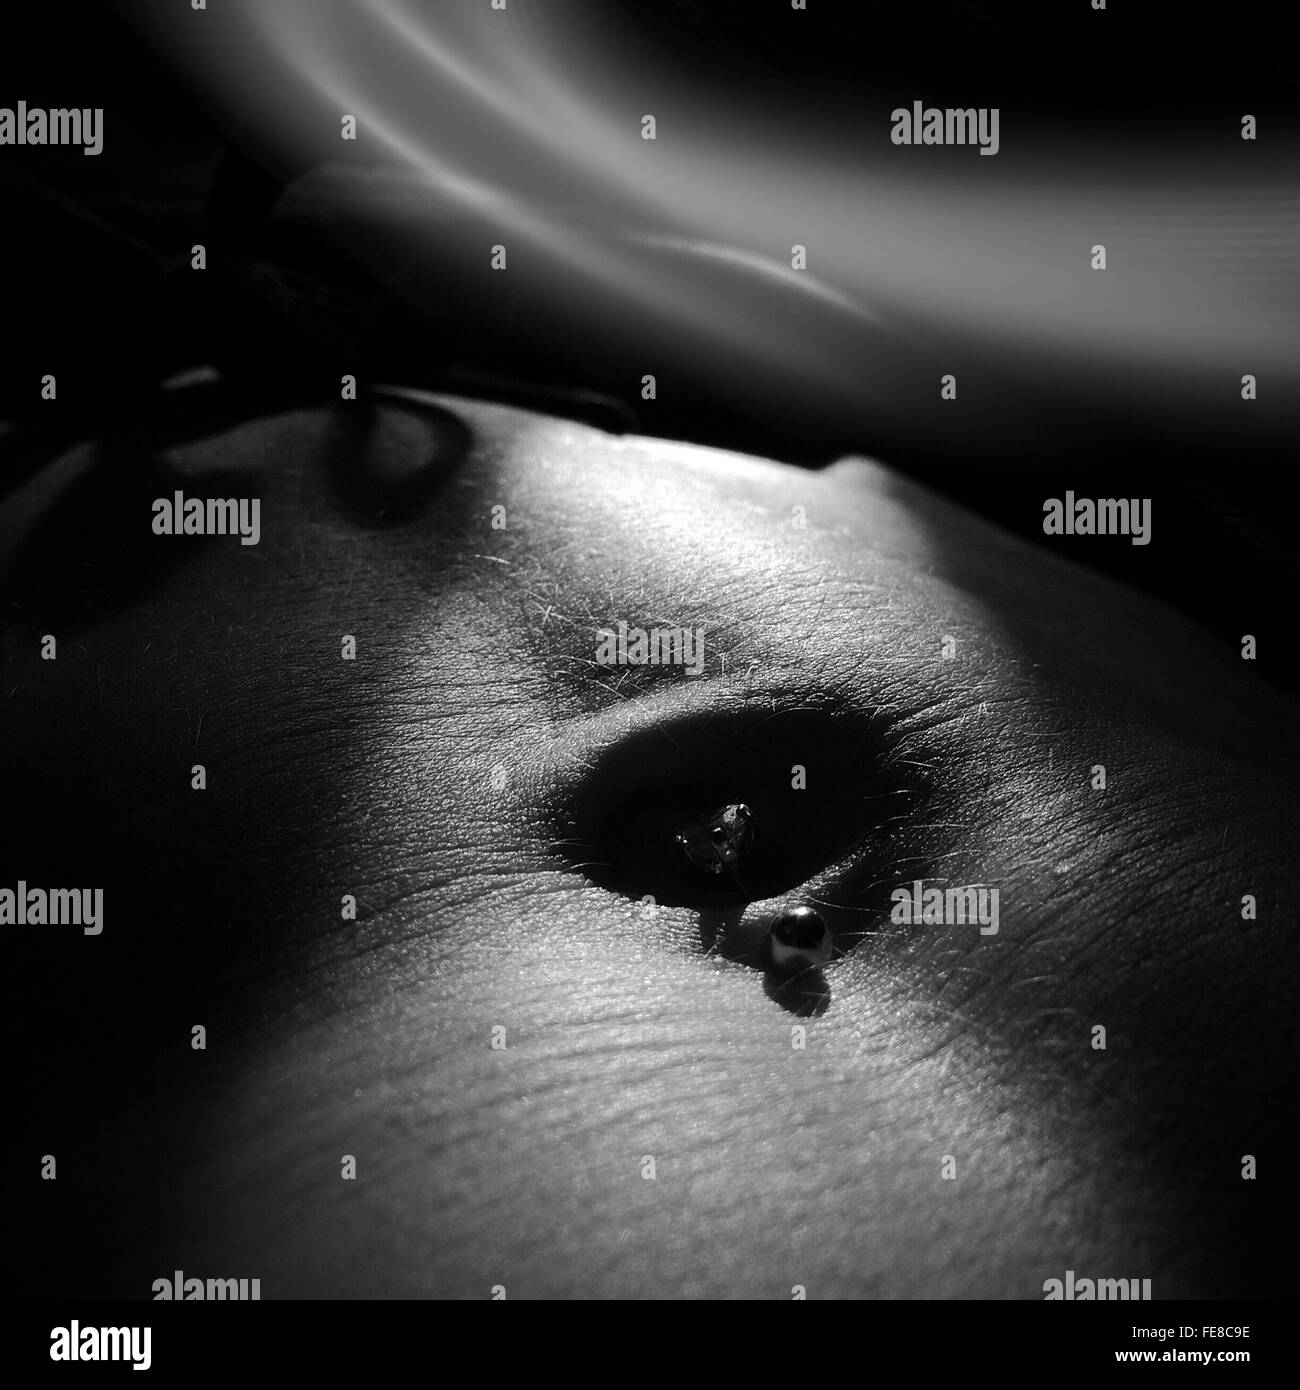 Belly button Black and White Stock Photos & Images - Alamy